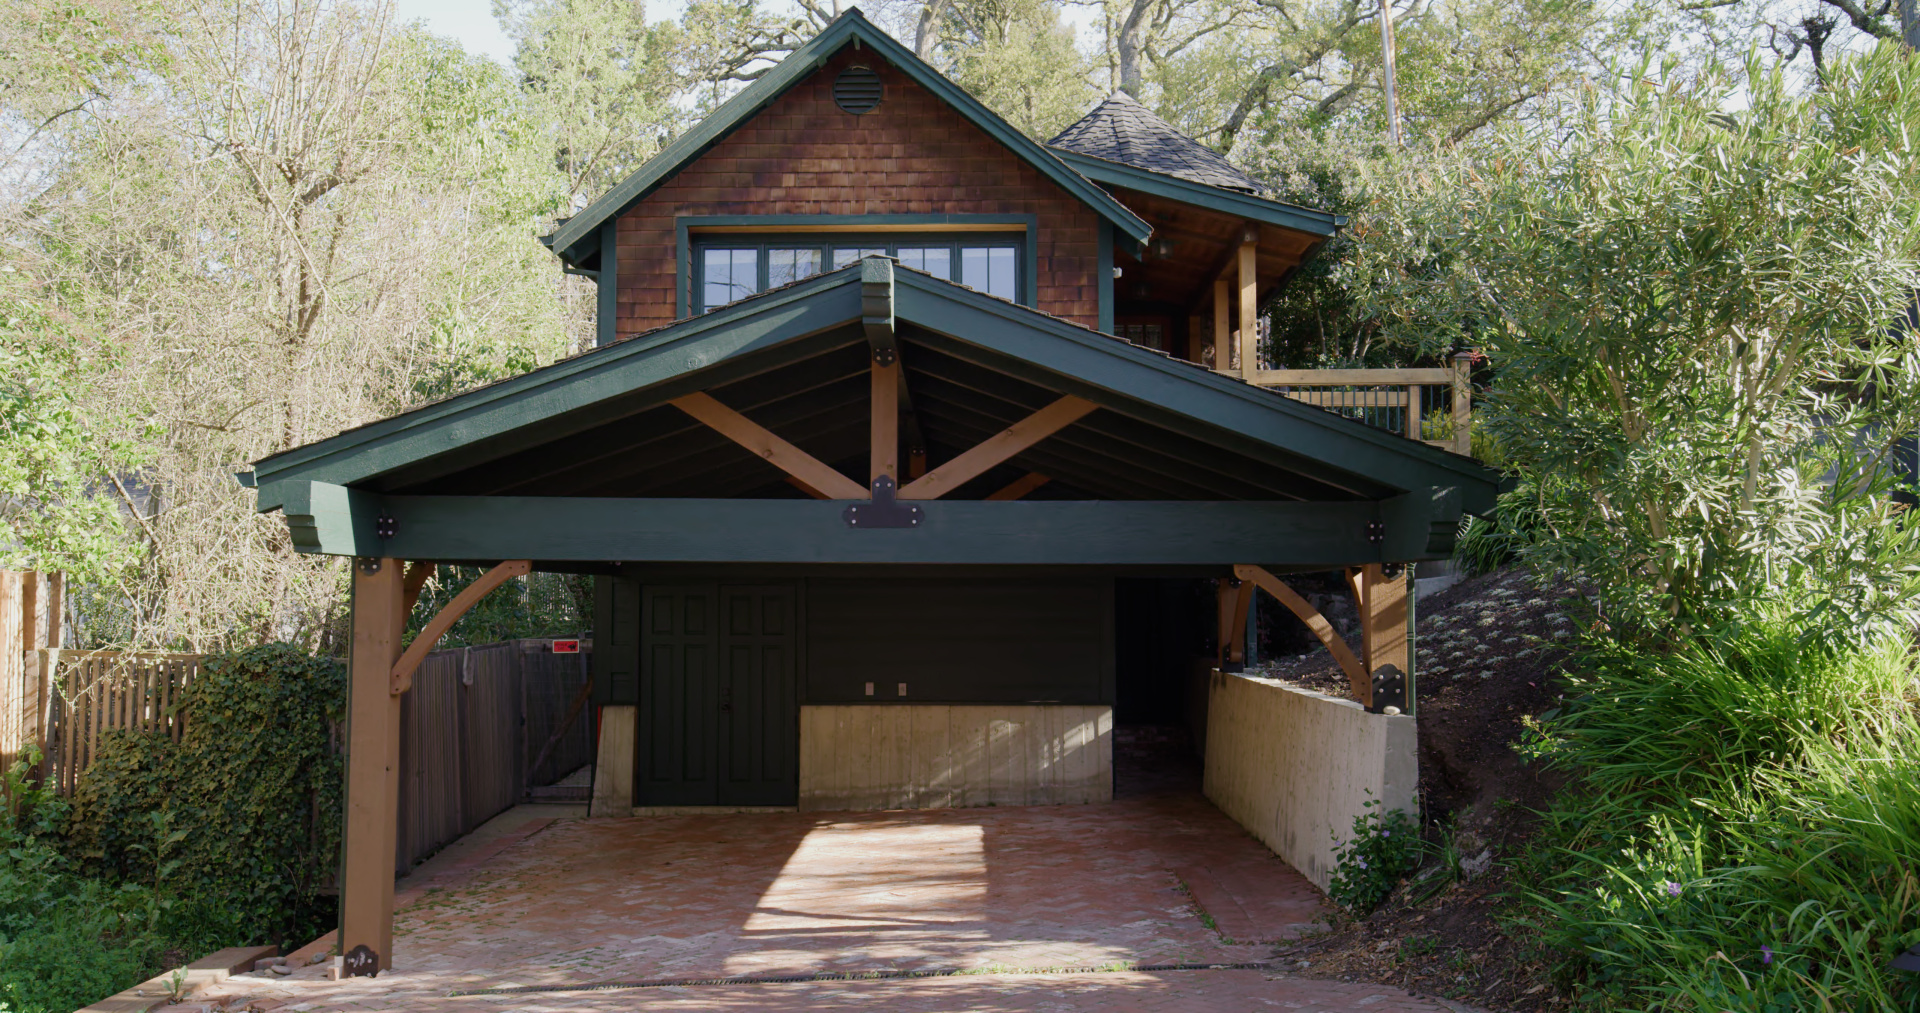 Image of the carport by Dream Big Construction